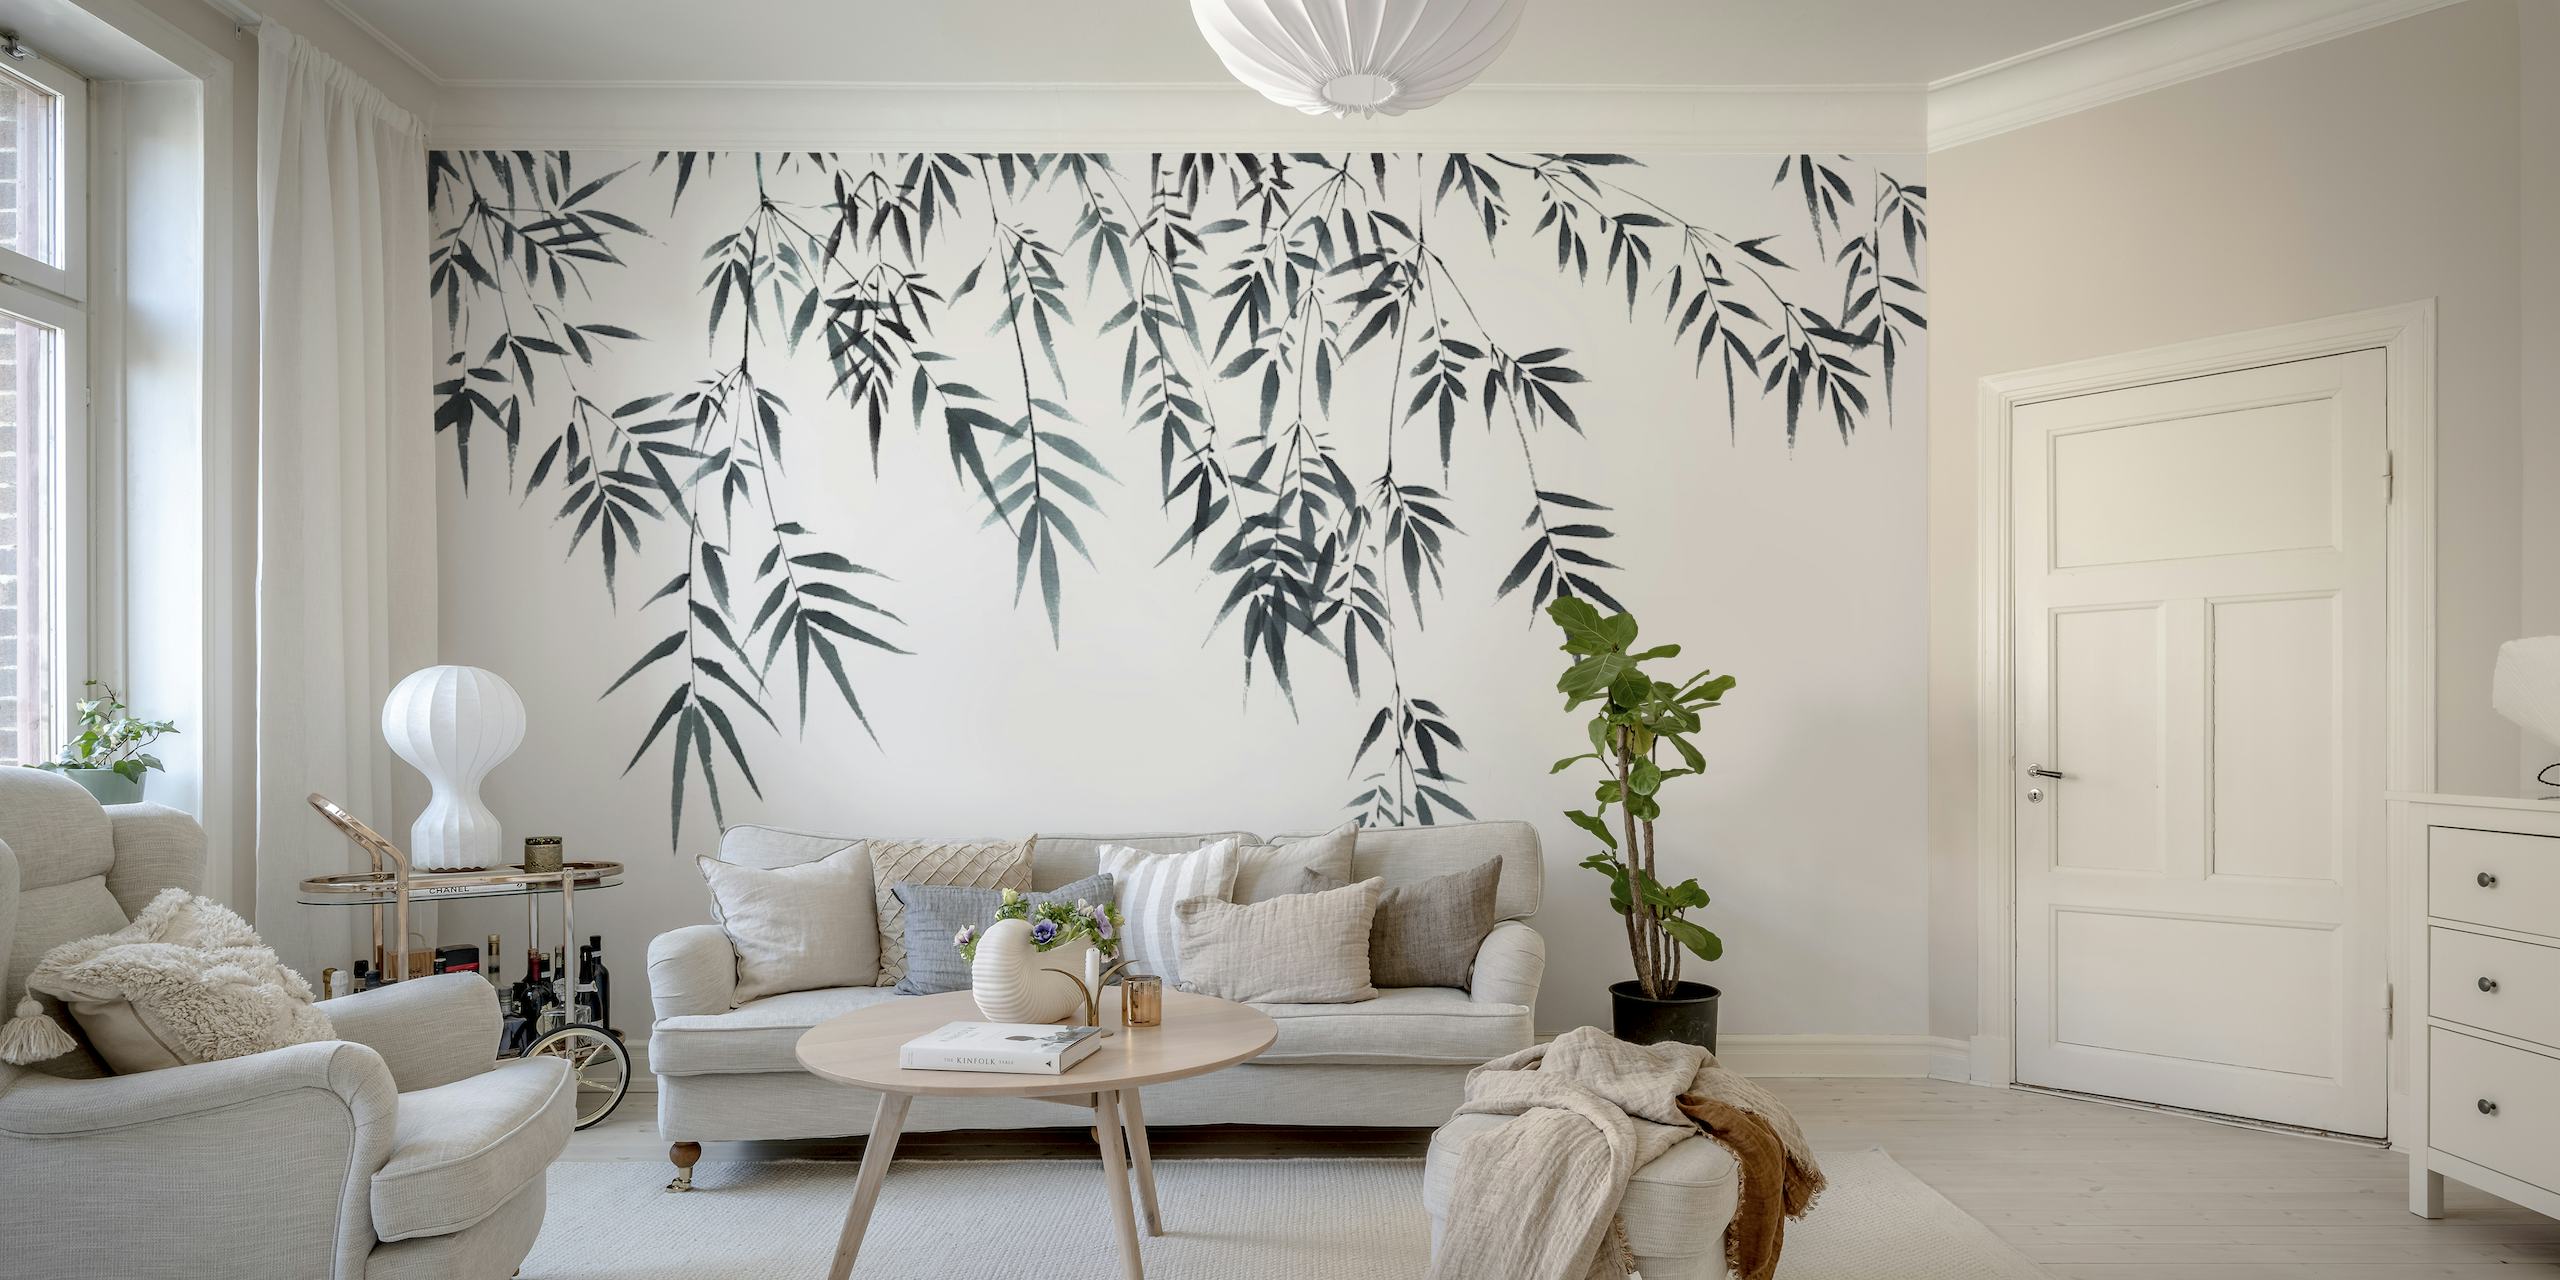 Chinese ink bamboo leaves wallpaper